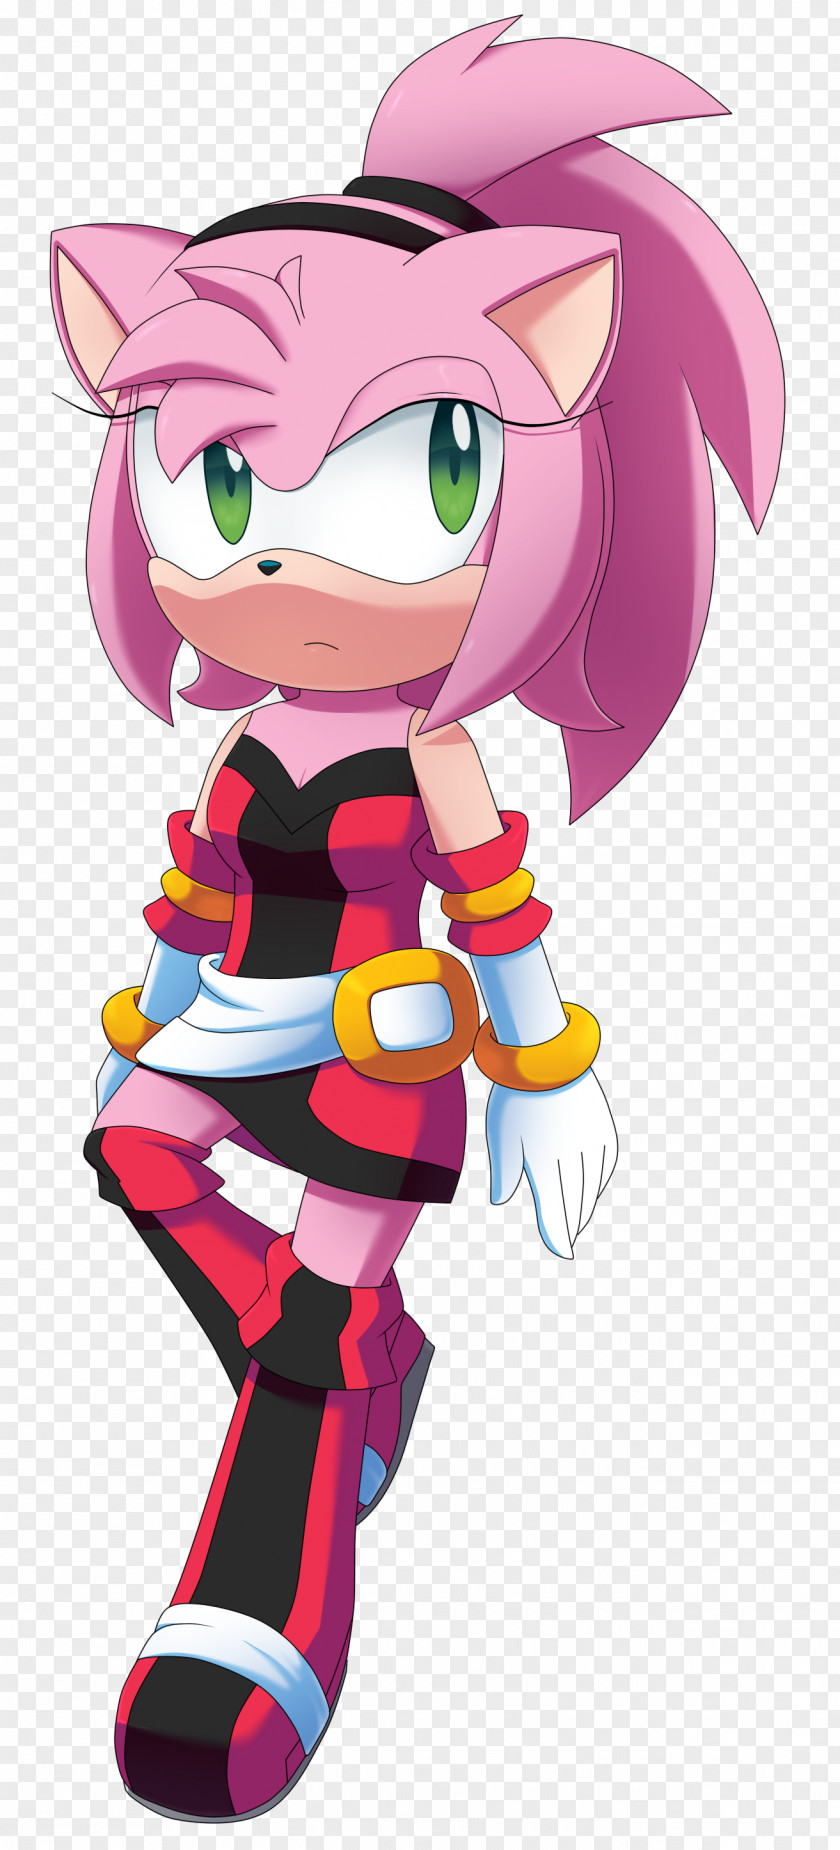 Amy Rose Sonic The Hedgehog 2 Tails & Knuckles Ariciul PNG